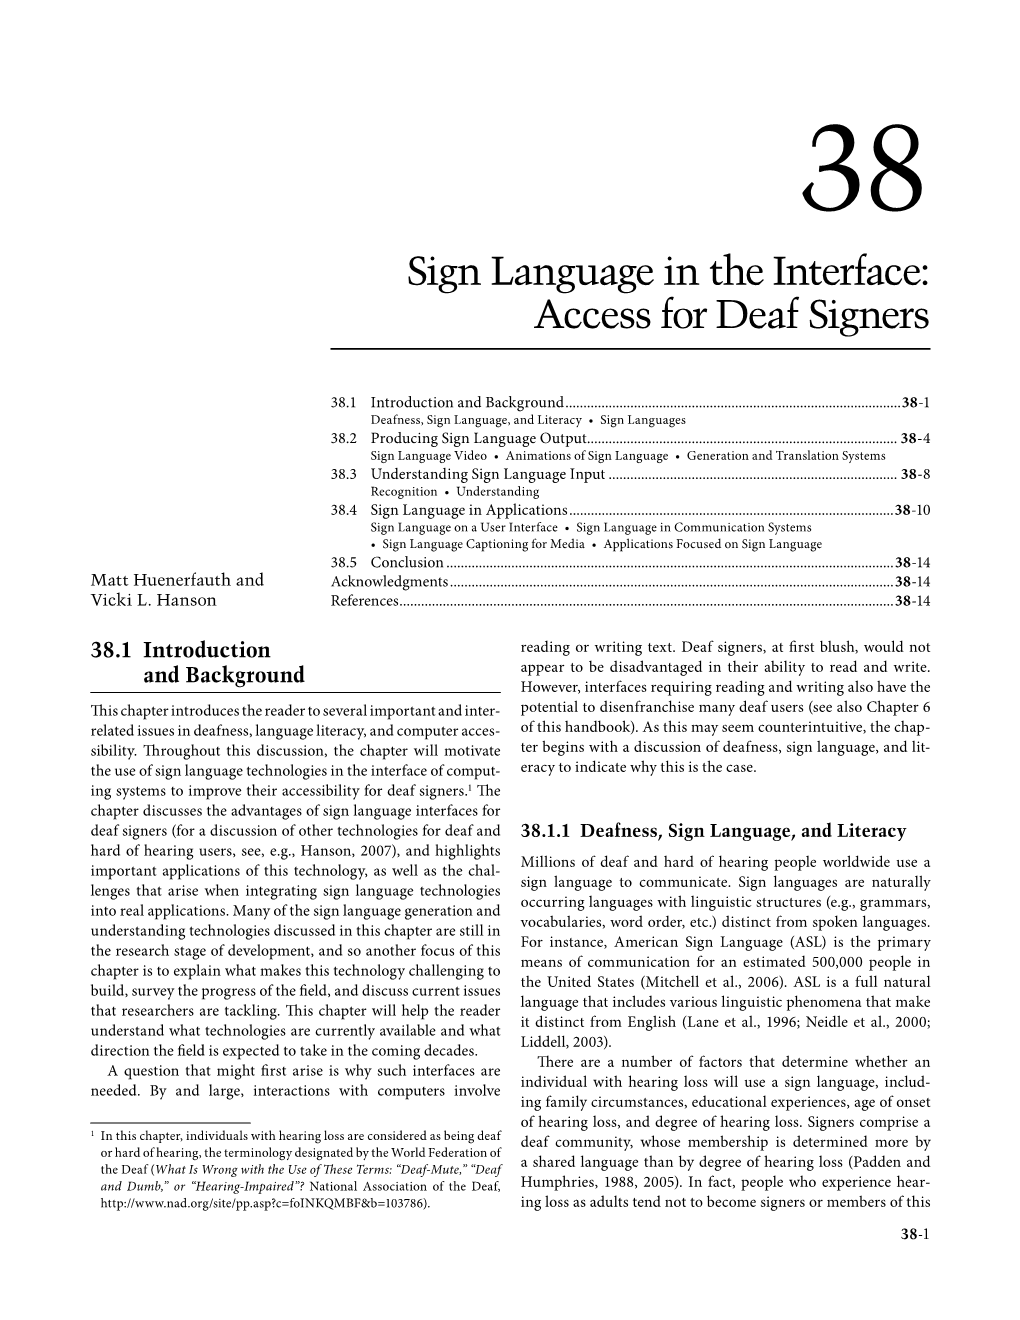 Sign Language in the Interface: Access for Deaf Signers